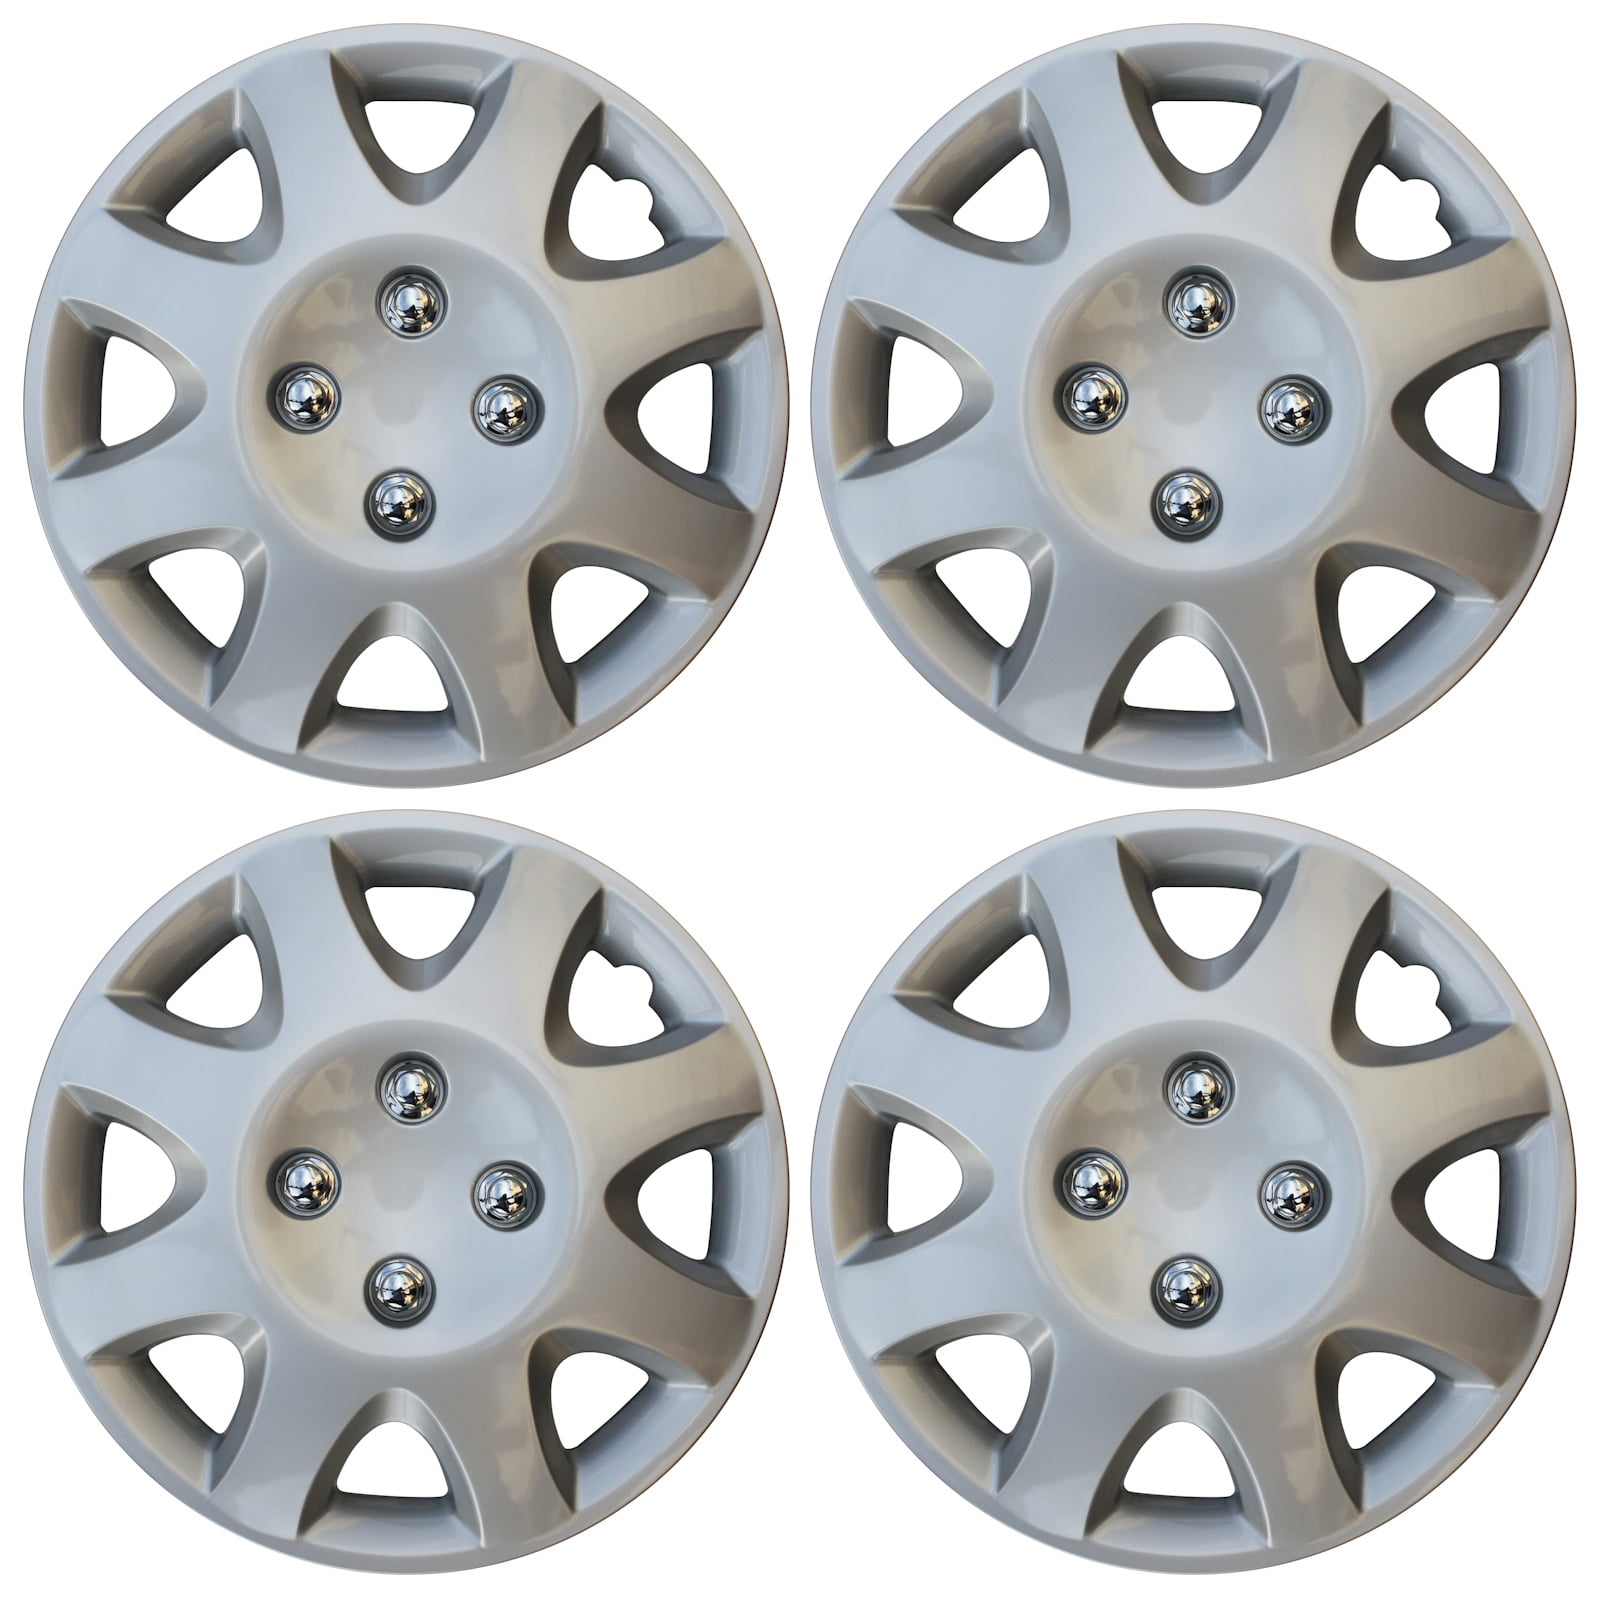 Set of 4 Silver Wheel Covers 2012-2013 16" Toyota Corolla Replacement hubcaps 